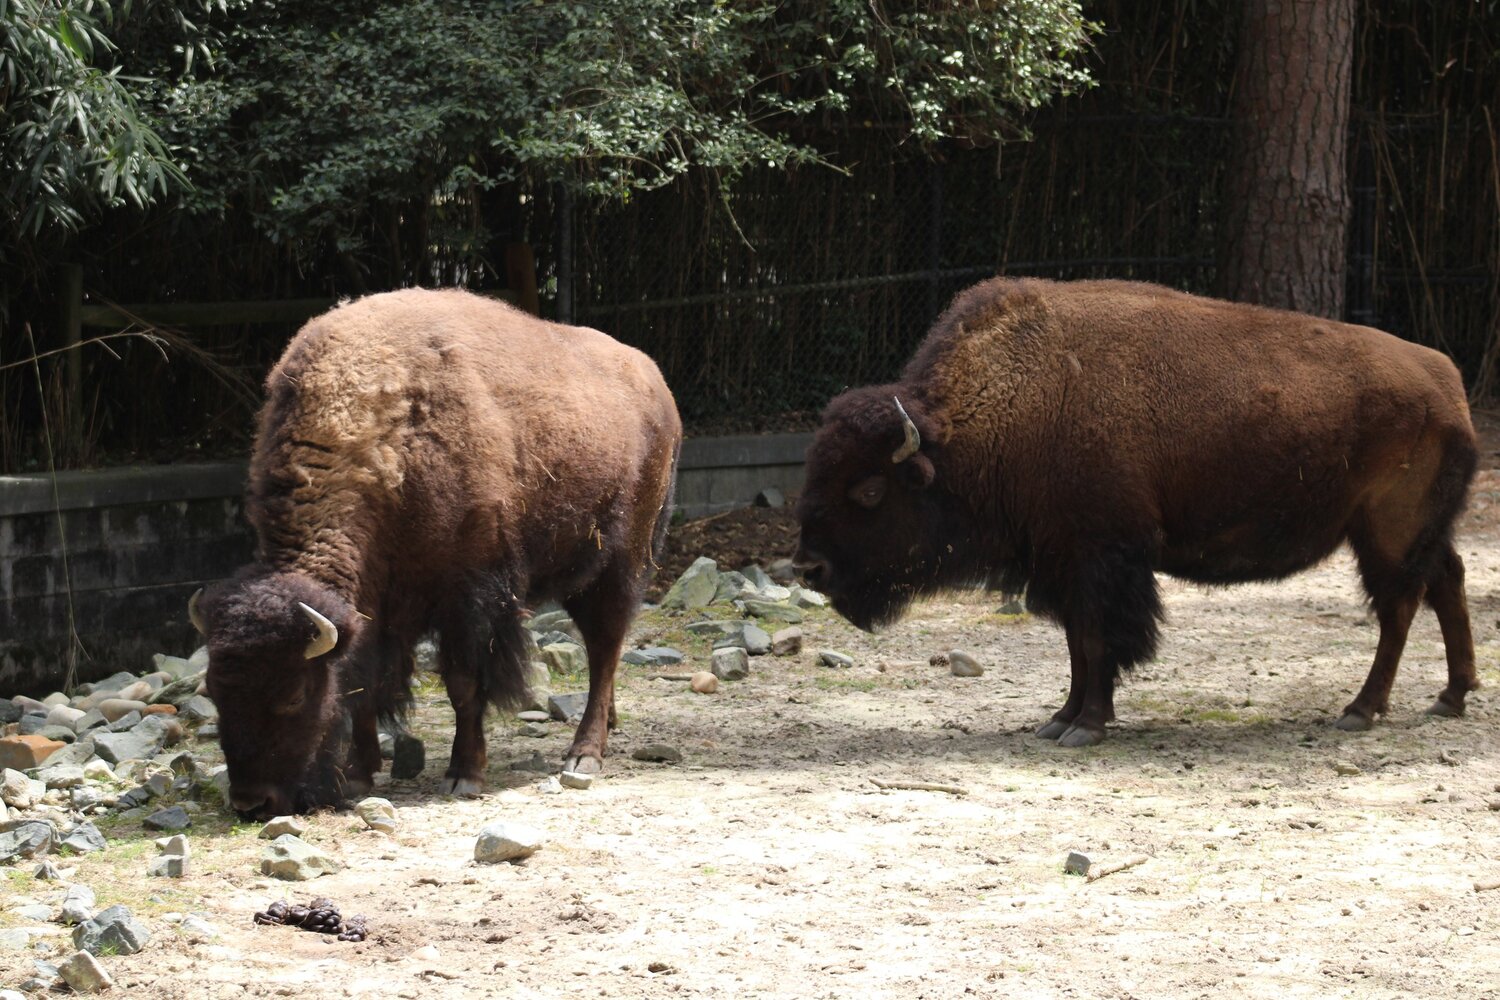 The Salisbury Zoo maintains two bison in its collection.